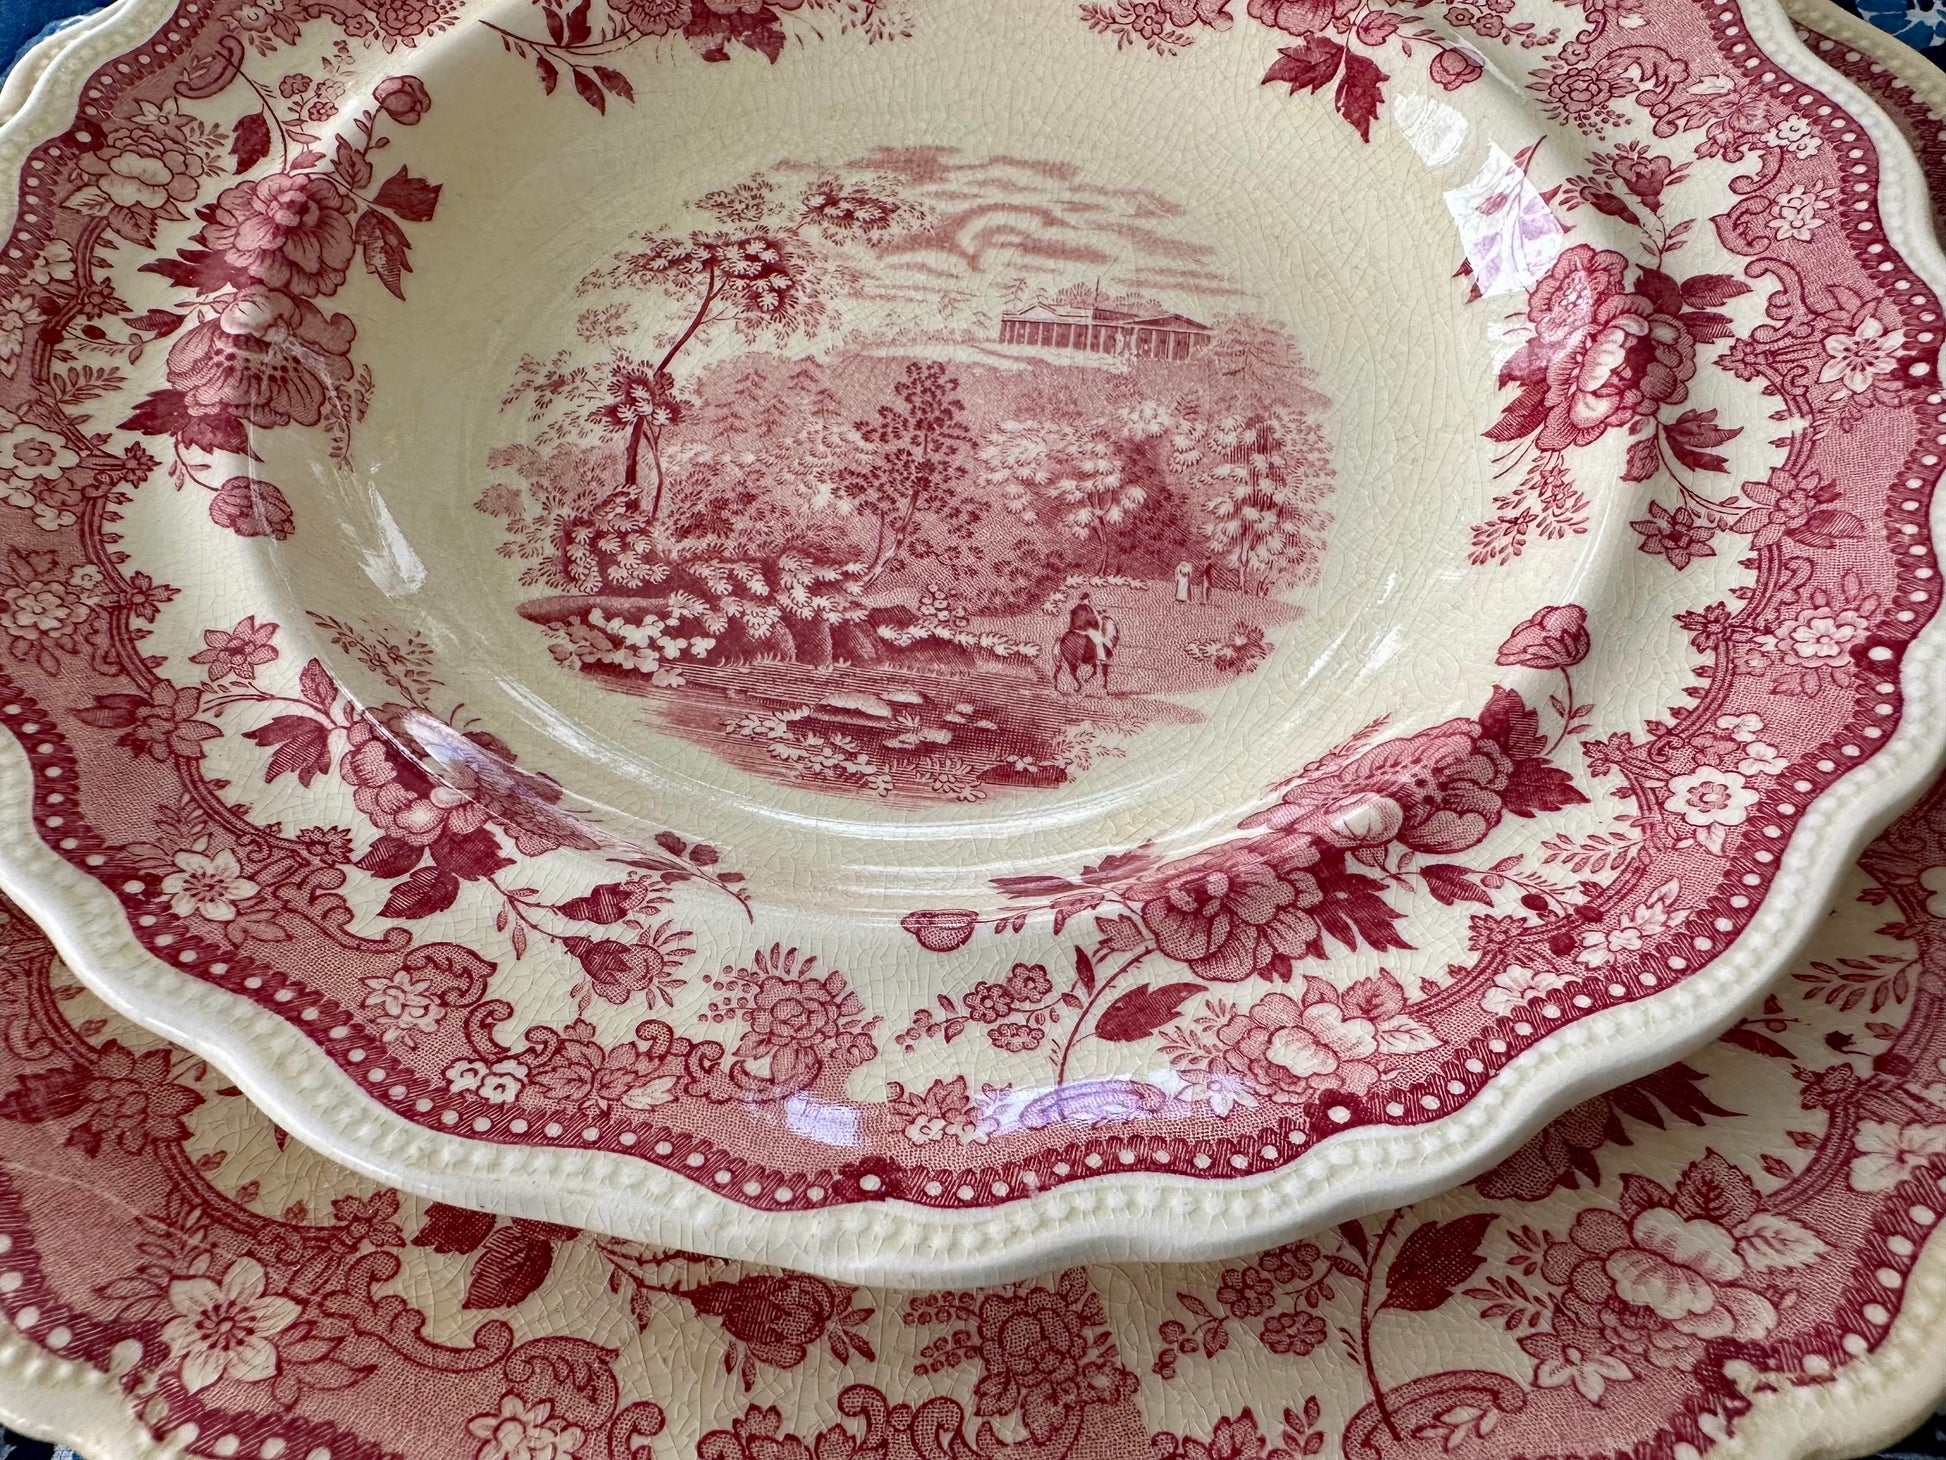 Set of 8 antique red and white transferware soup bowls made by William Ridgway in 1830's - DharBazaar